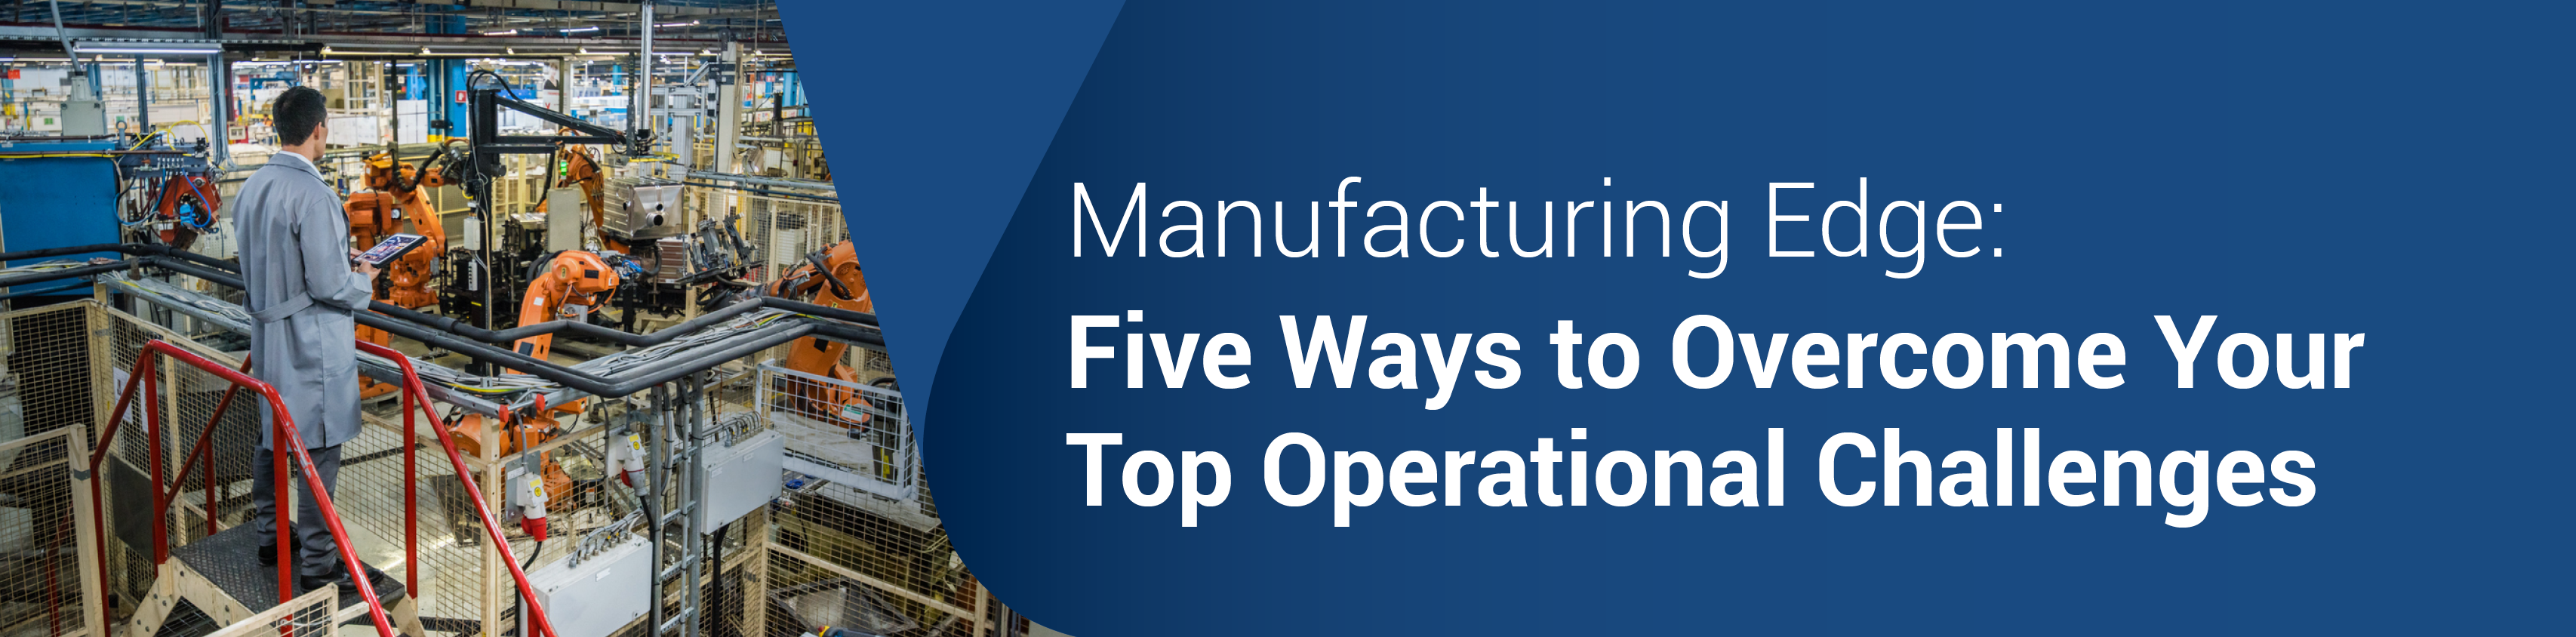 Overcome Top Operational Challenges